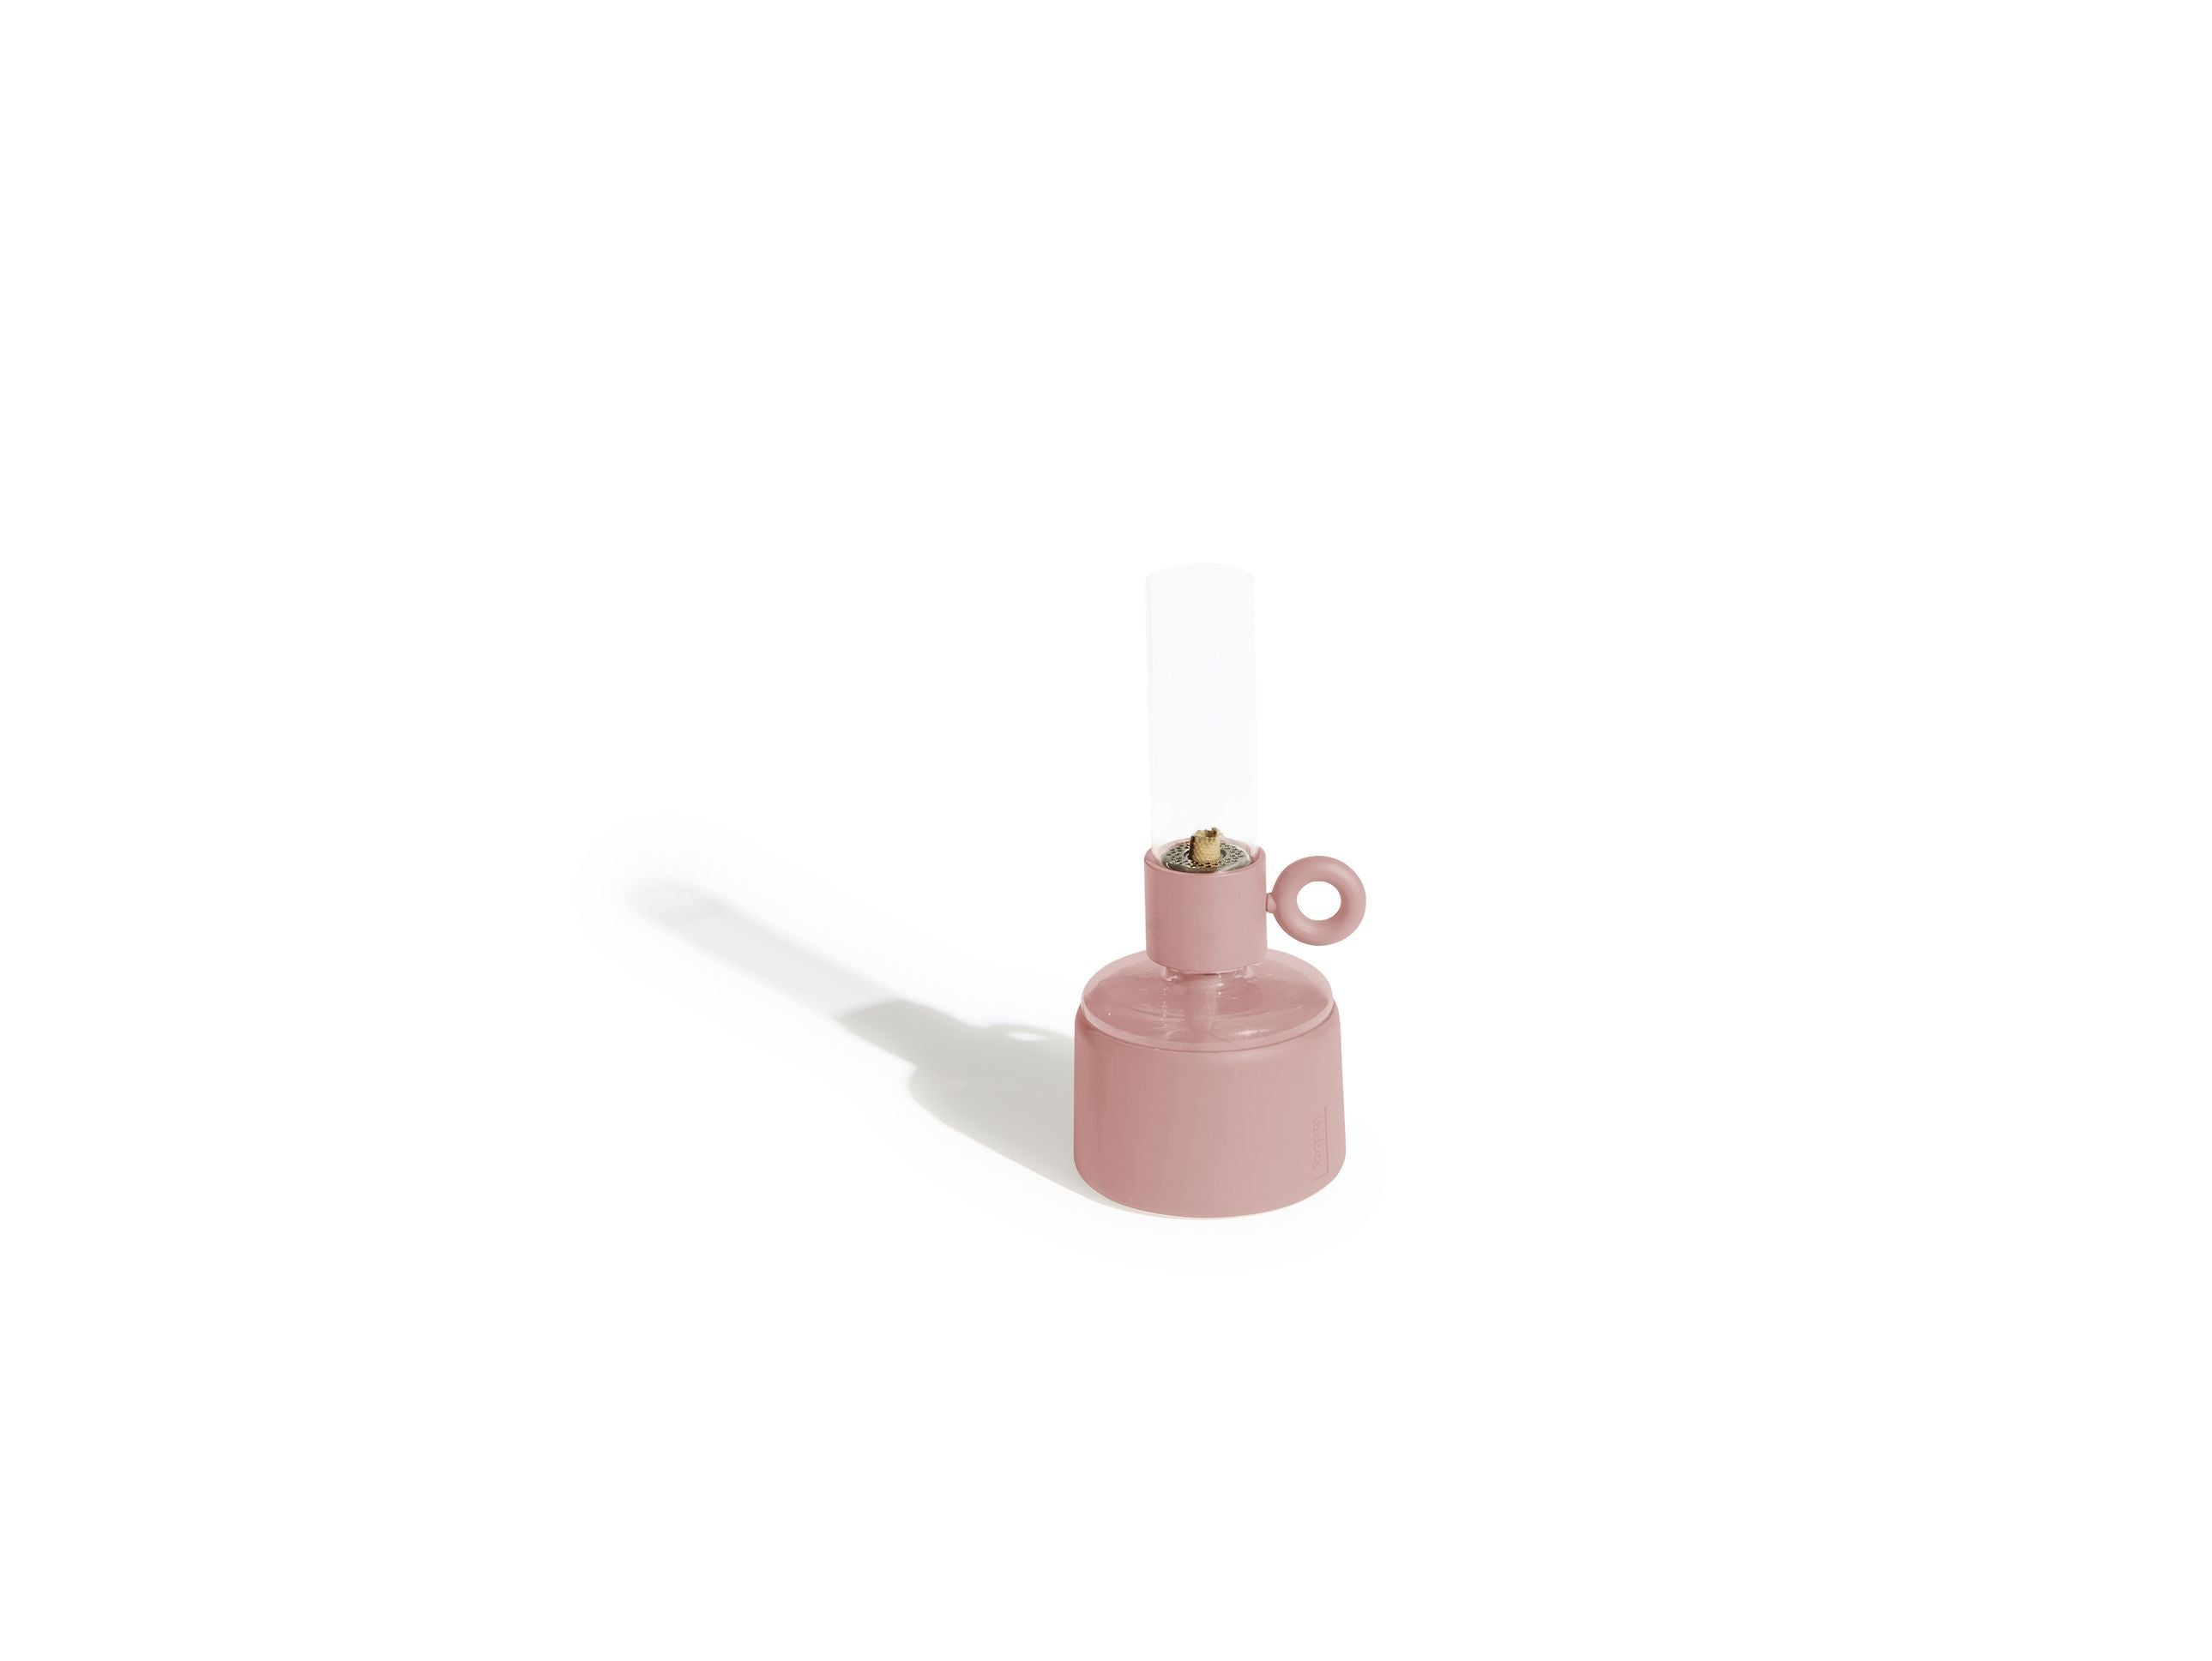 Fatboy Flamtastique Xs Oil Lamp, Cheeky Pink